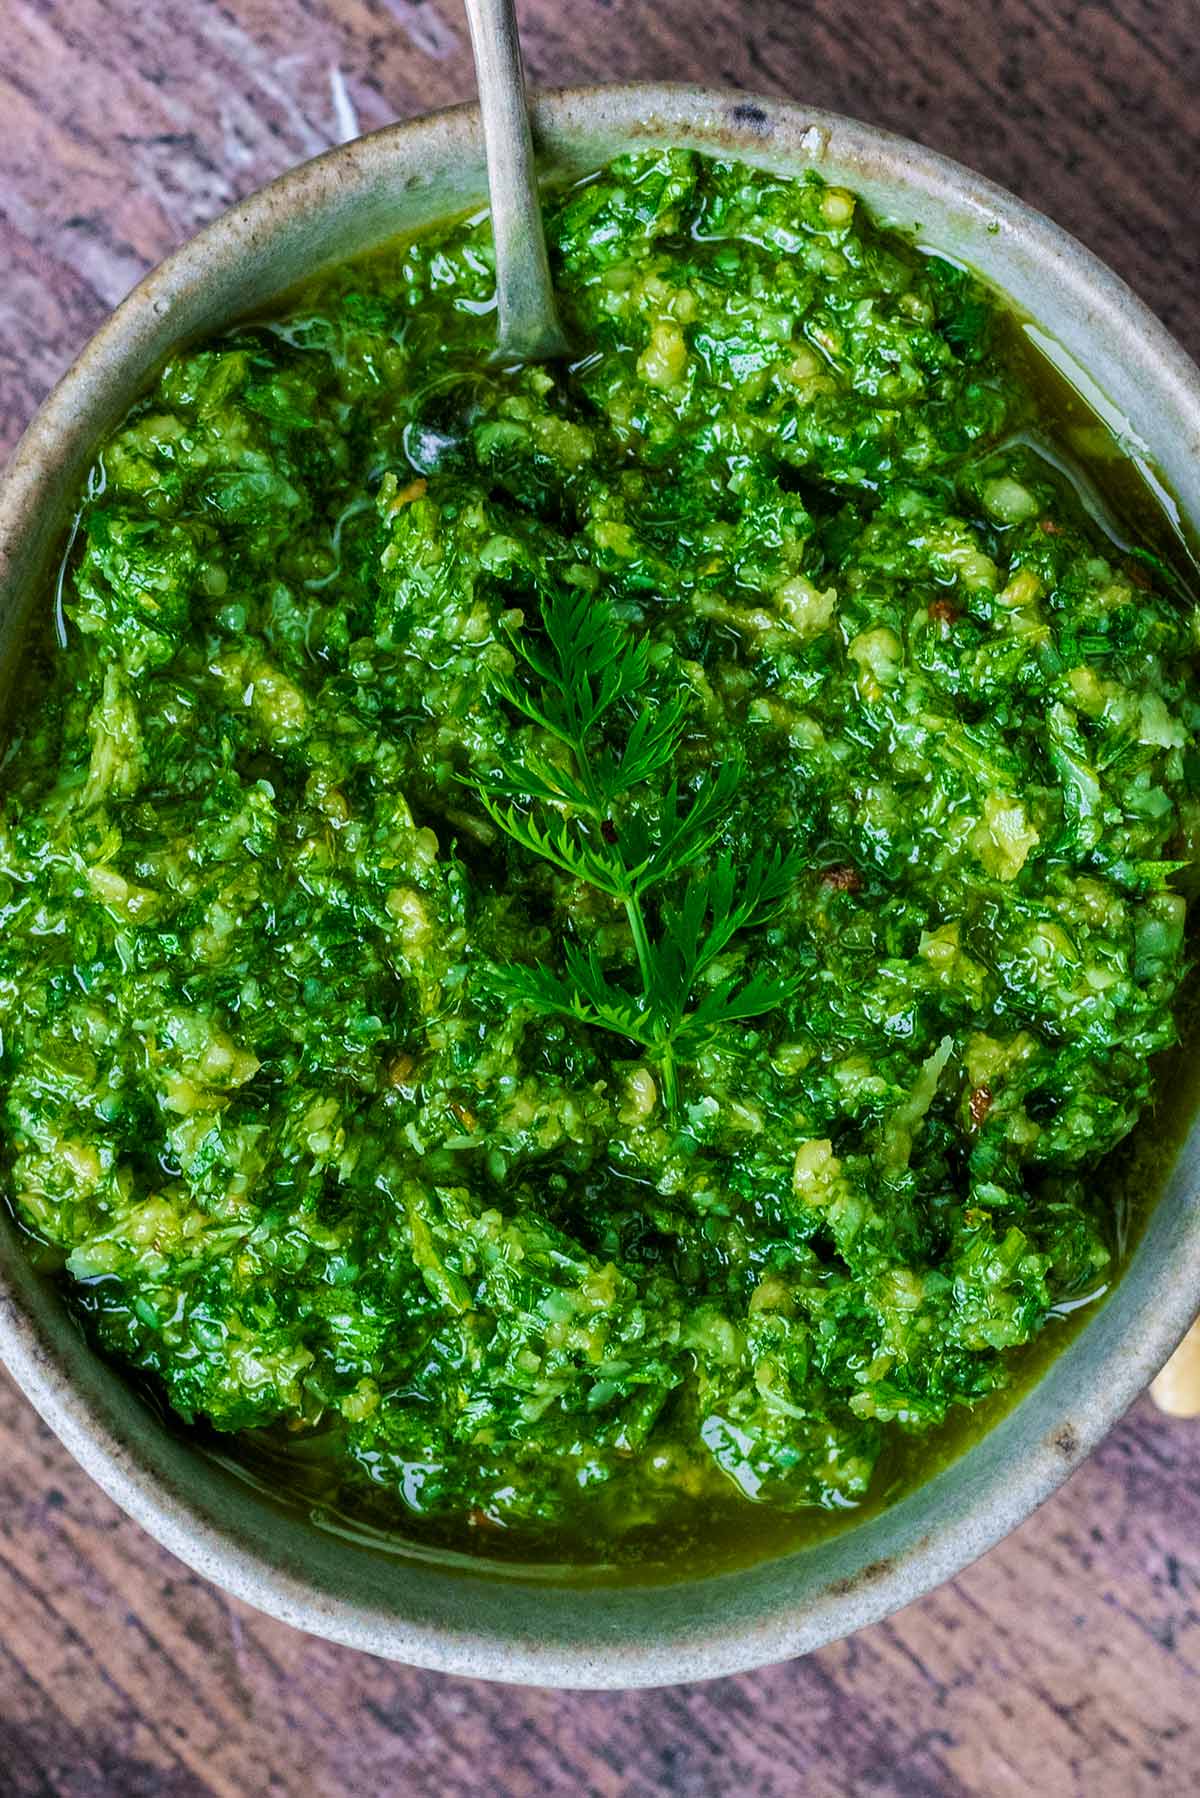 A vibrant green pesto with a sprig of carrot top on it.